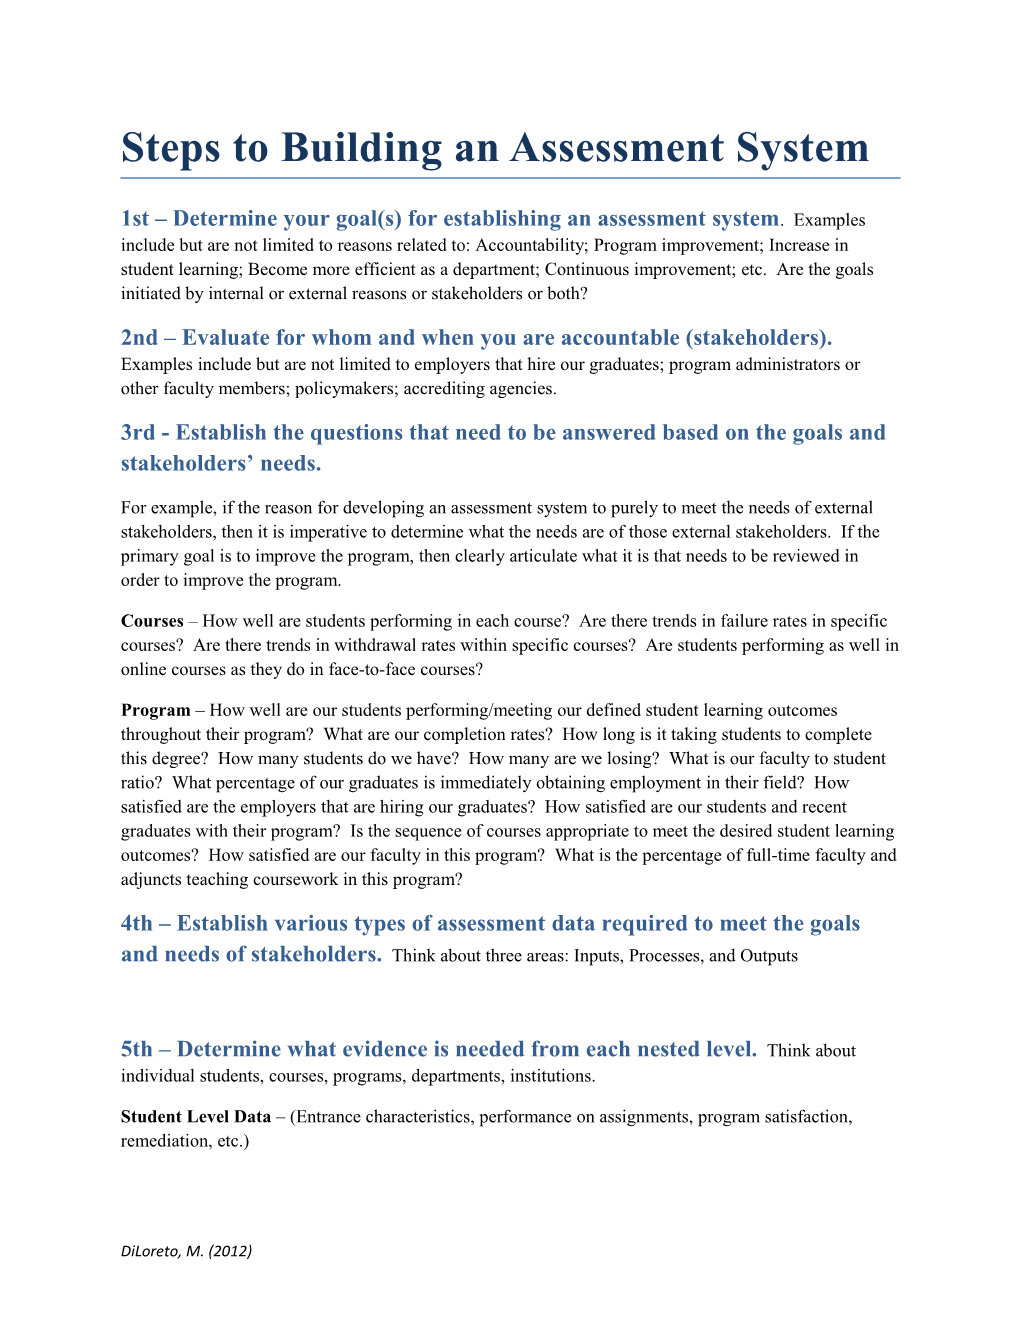 Steps to Building an Assessment System